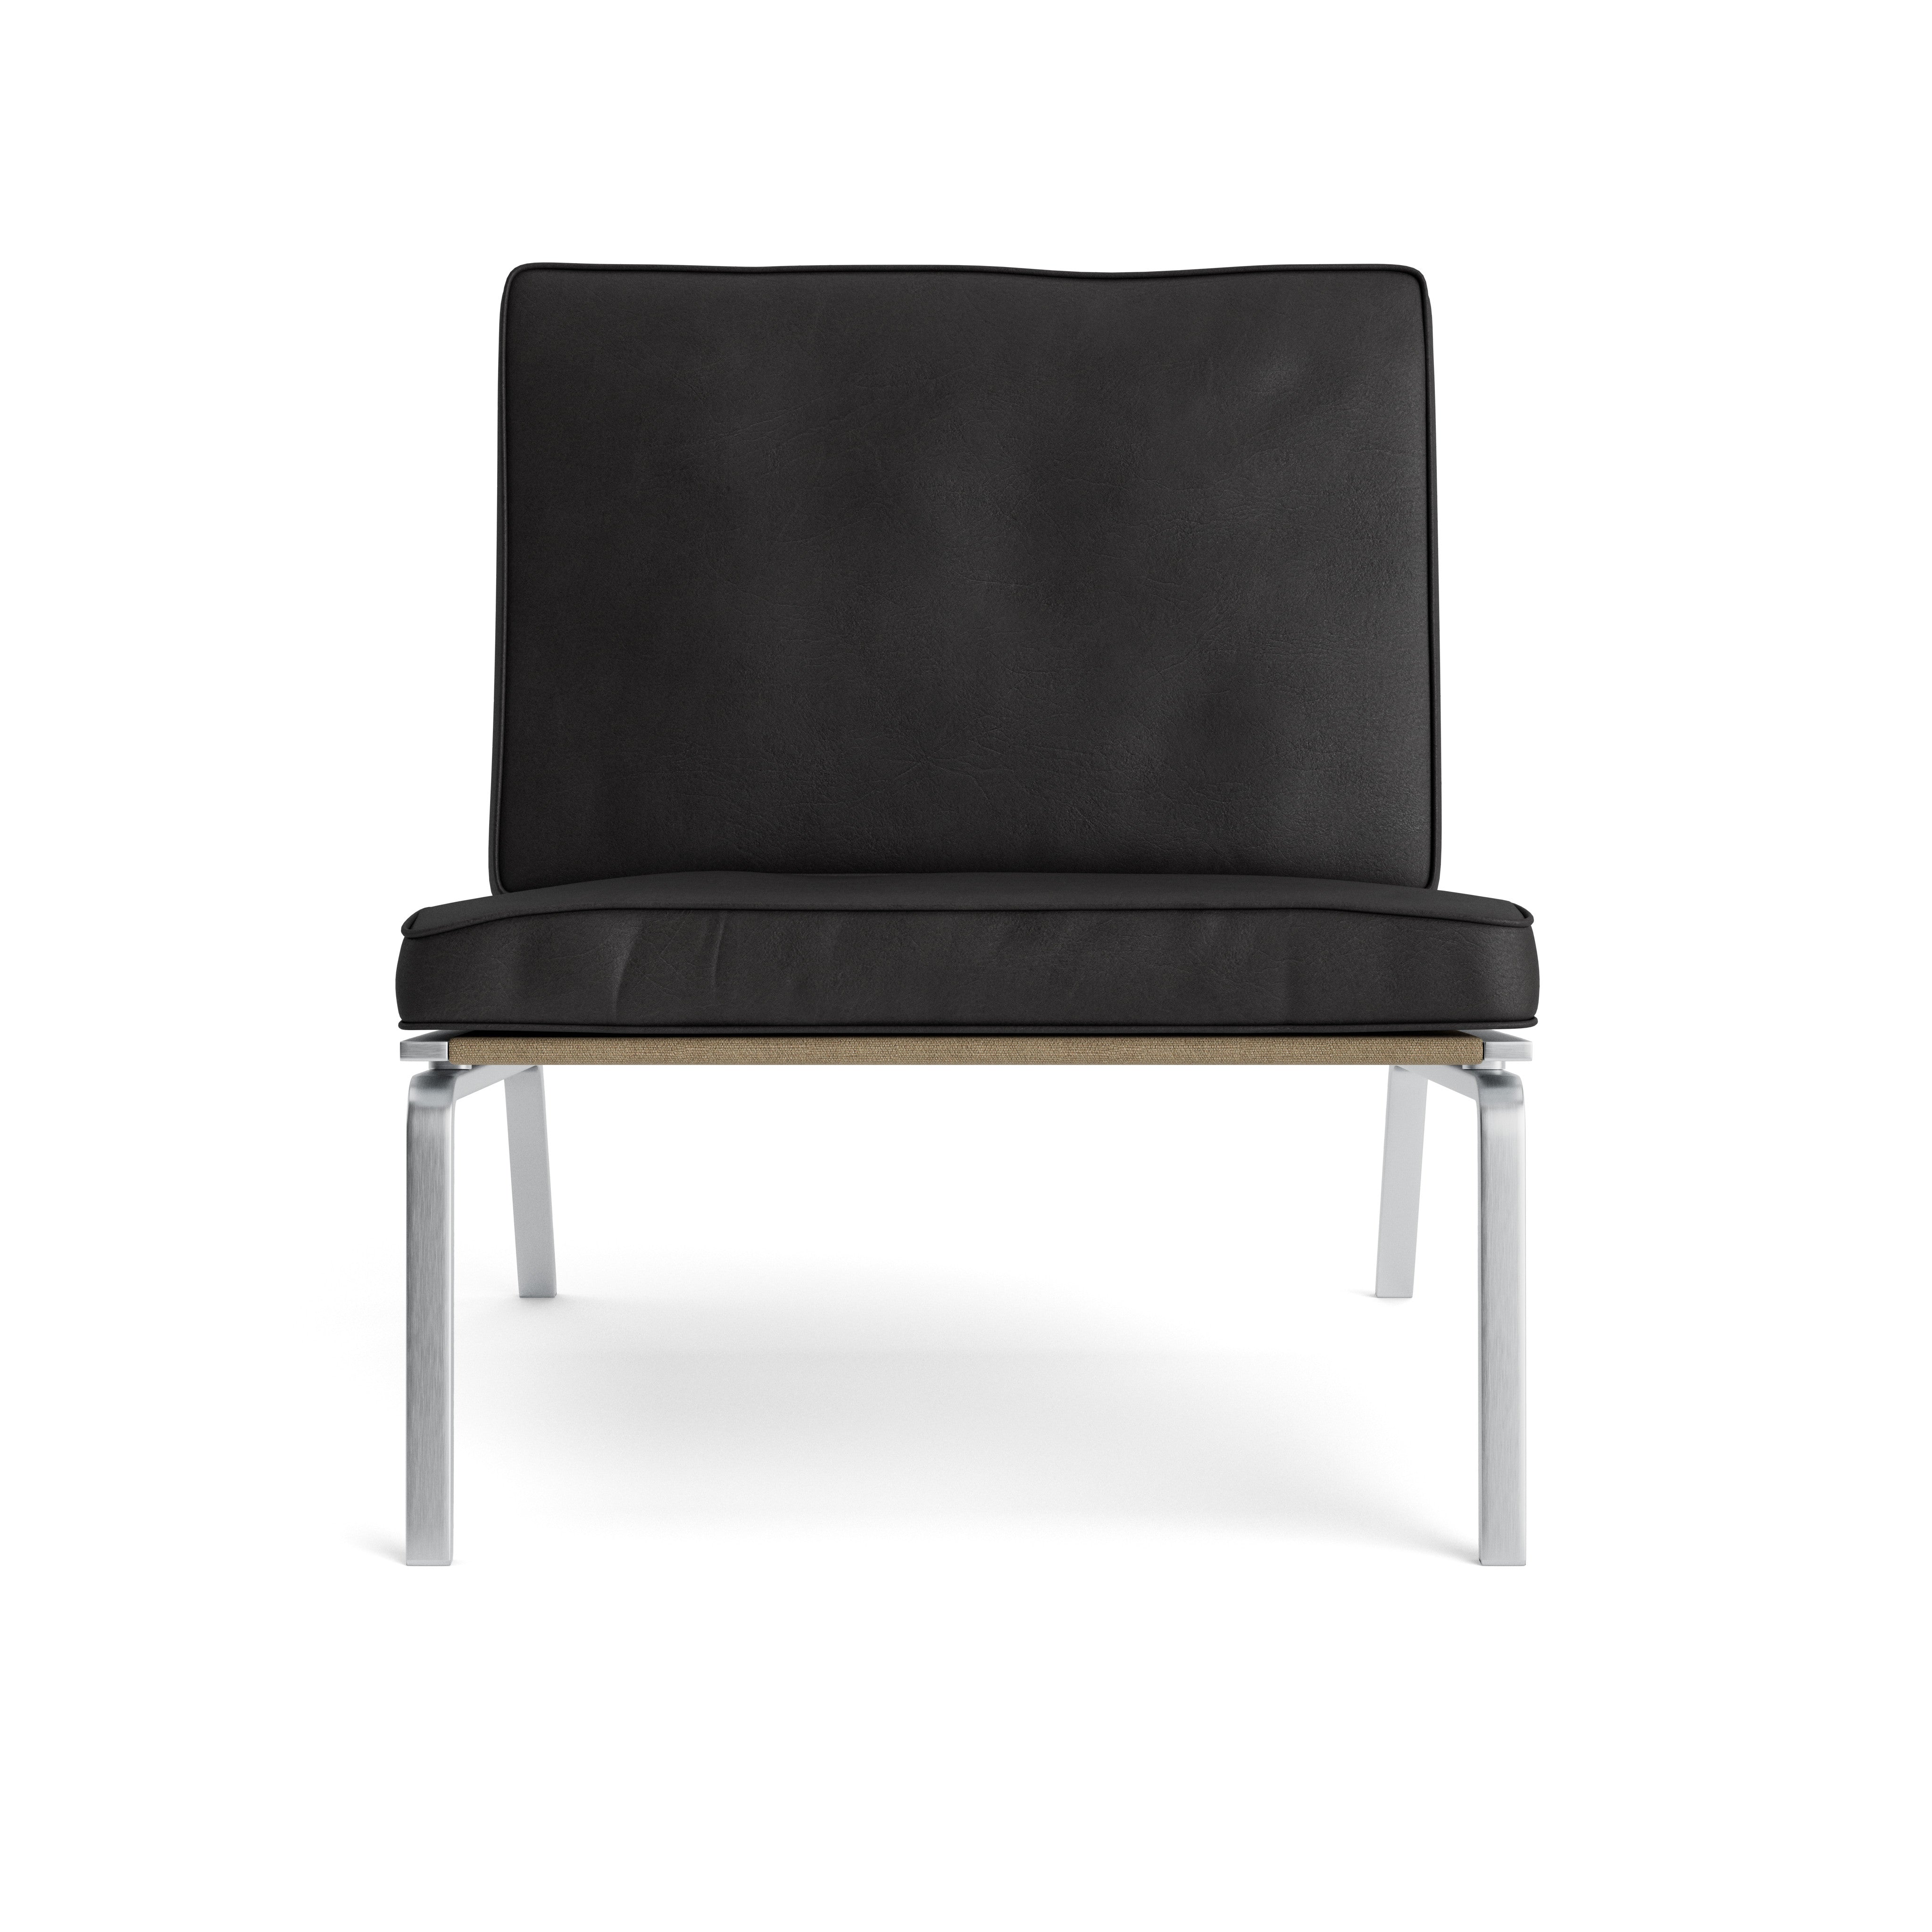 NORR11 Man Lounge Chair